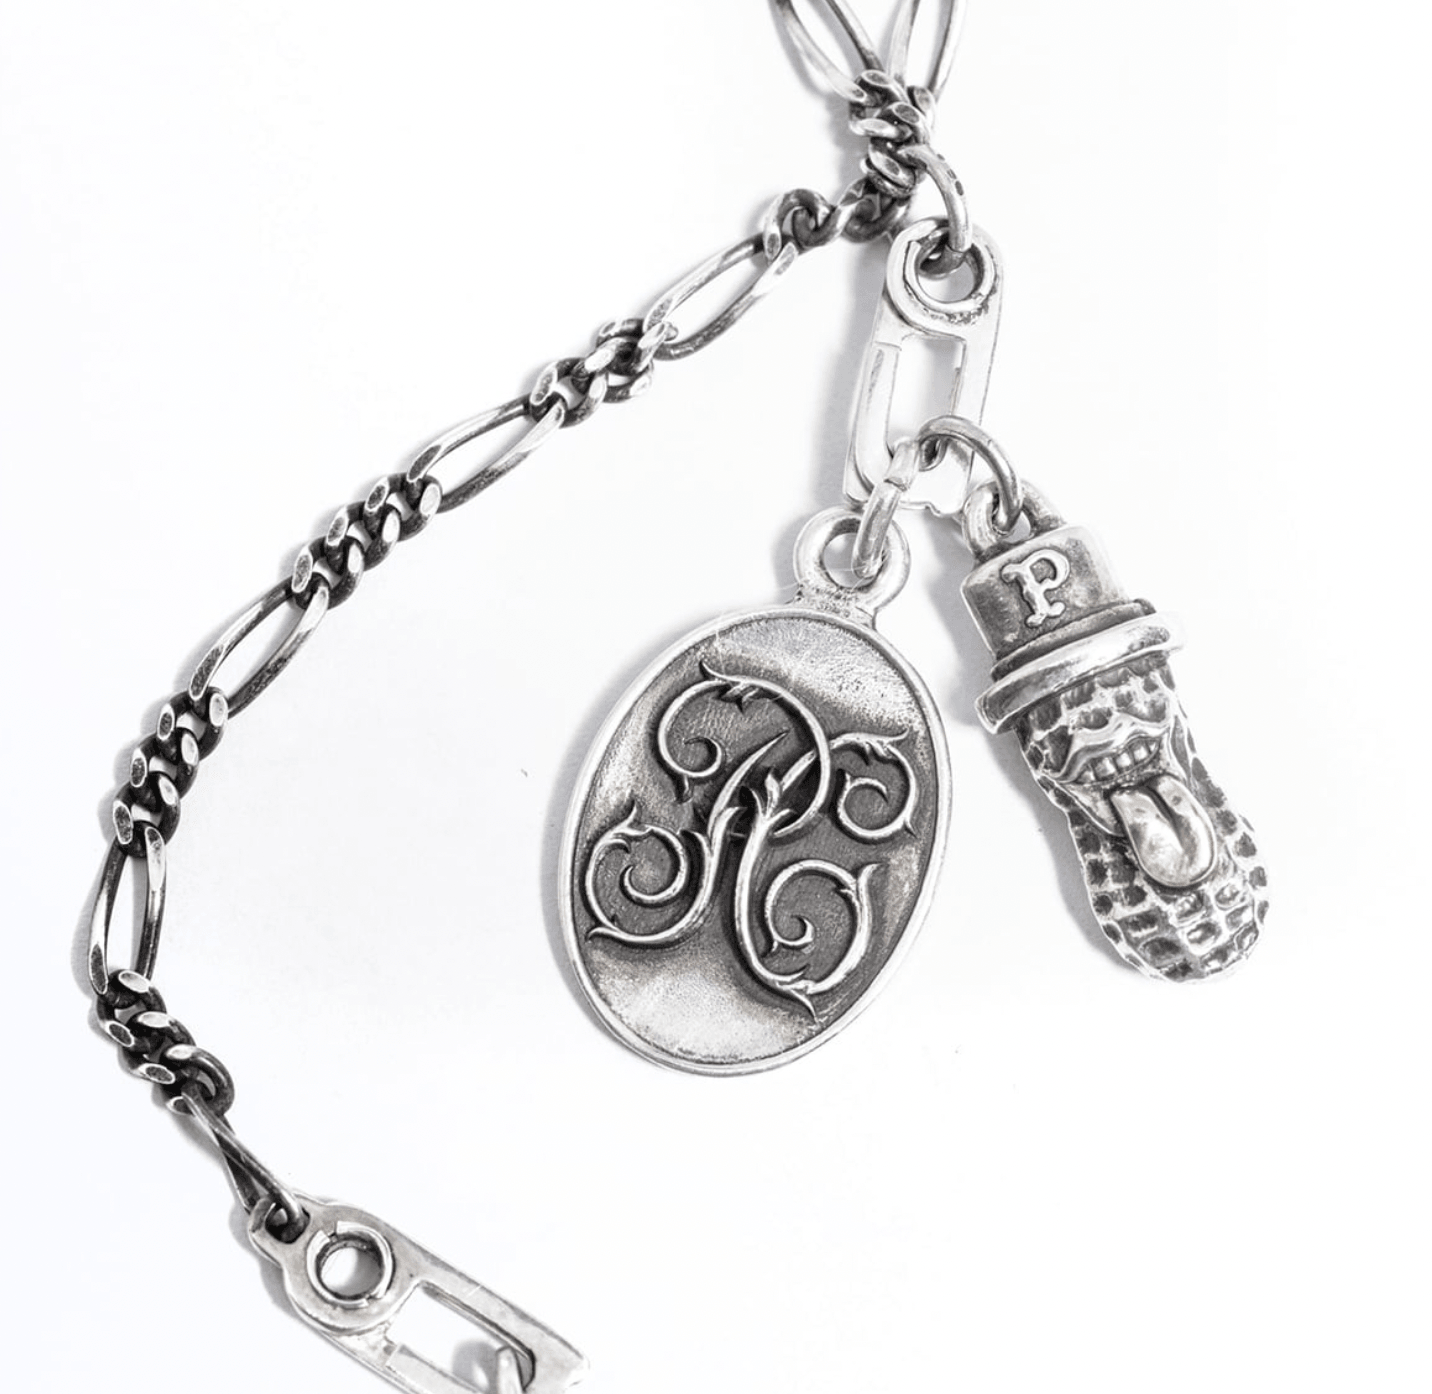 Image showing the Peanuts & Co SAME SHIT DIFFERENT DAY Chain - Silver which is a Jewellery described by the following info Accessories, Jewellery, Peanuts & Co, Released and sold on the IRON HEART GERMANY online store